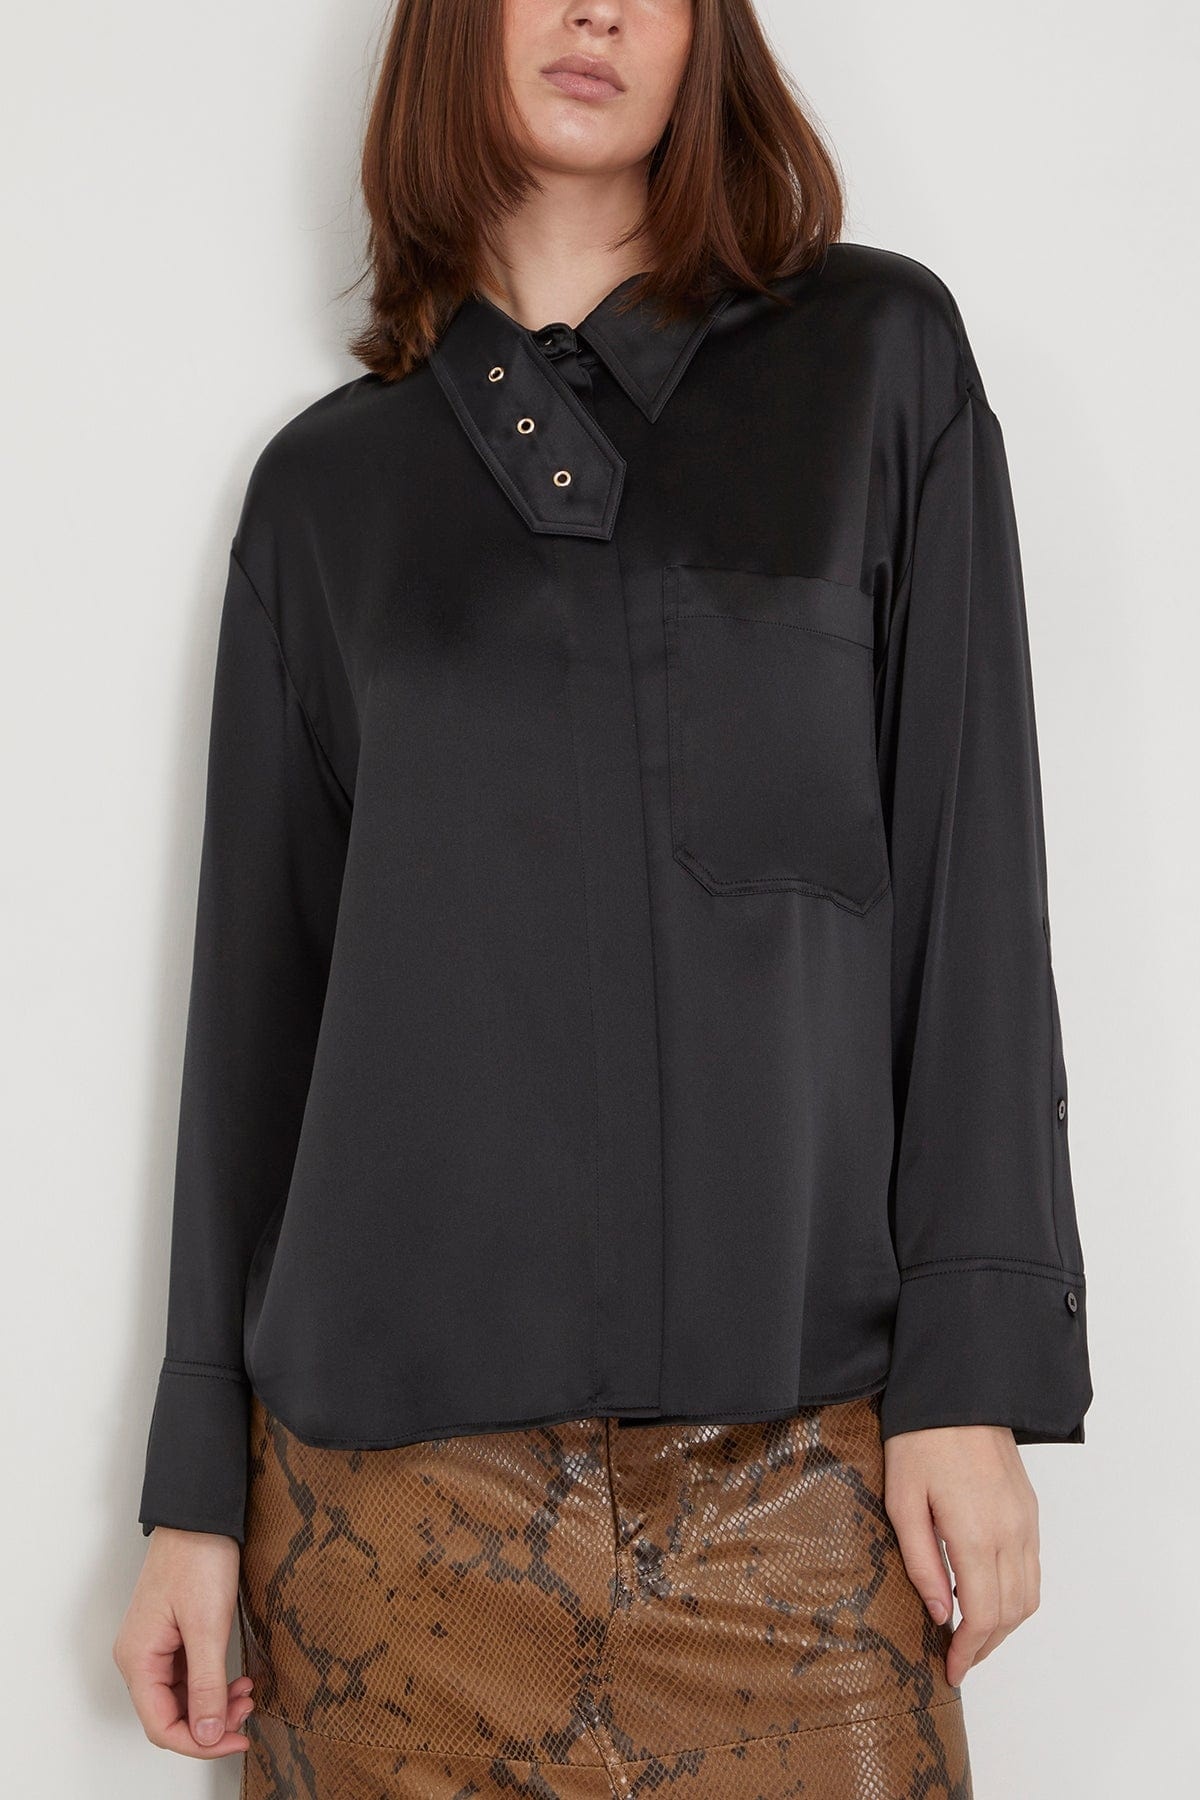 Shiny Statement Casual Shirt in Pure Black - 3